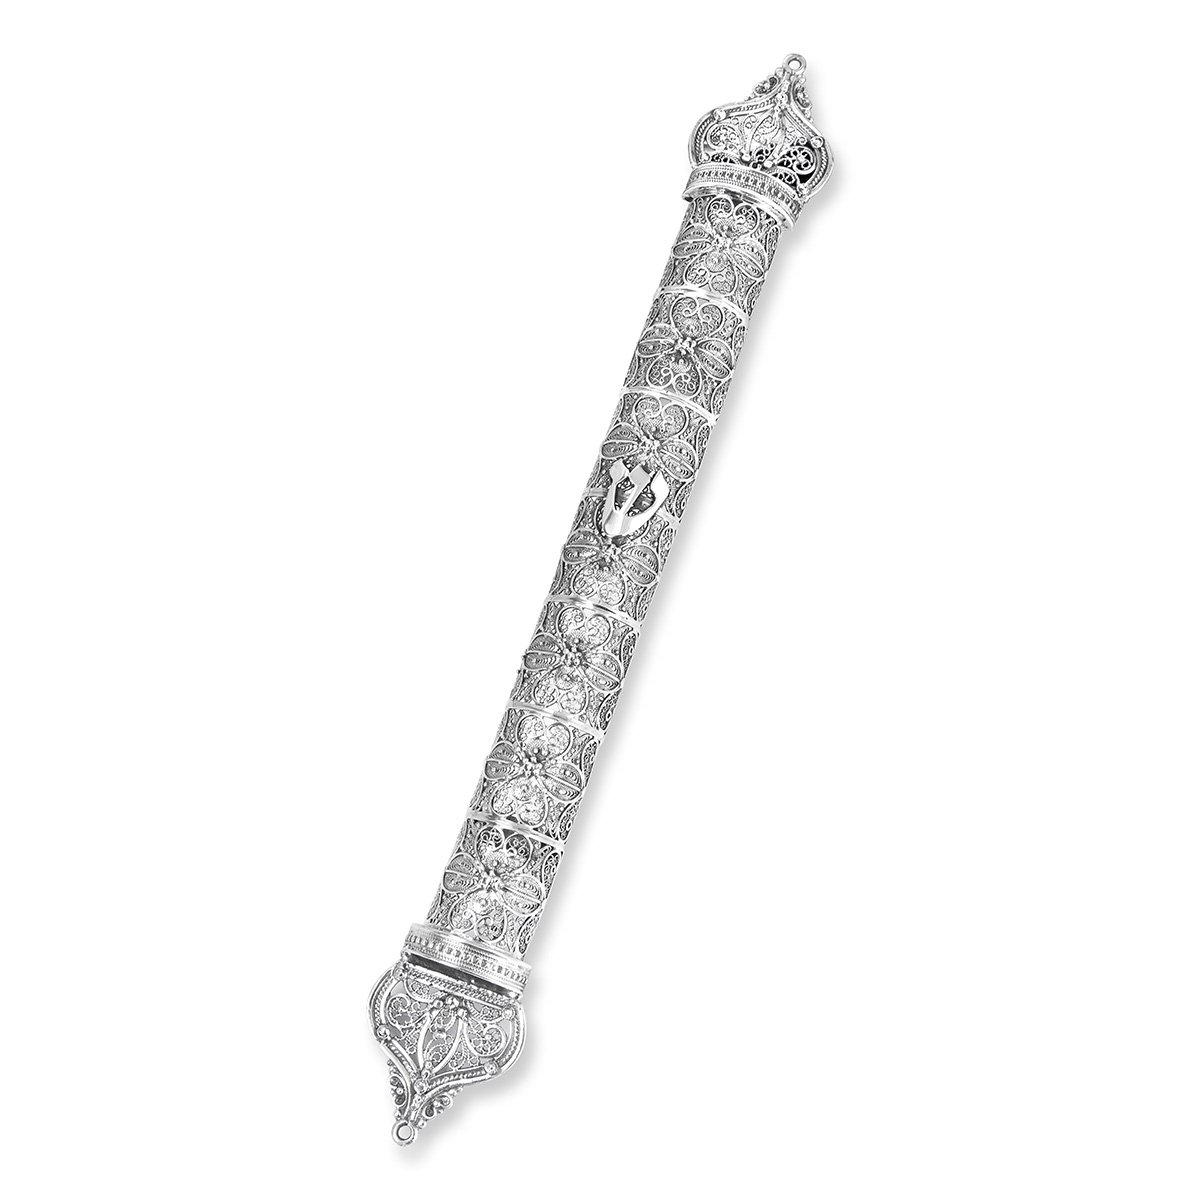 Traditional Yemenite Art Extra Large Handcrafted Sterling Silver Mezuzah Case With Ornate Floral Design - 1